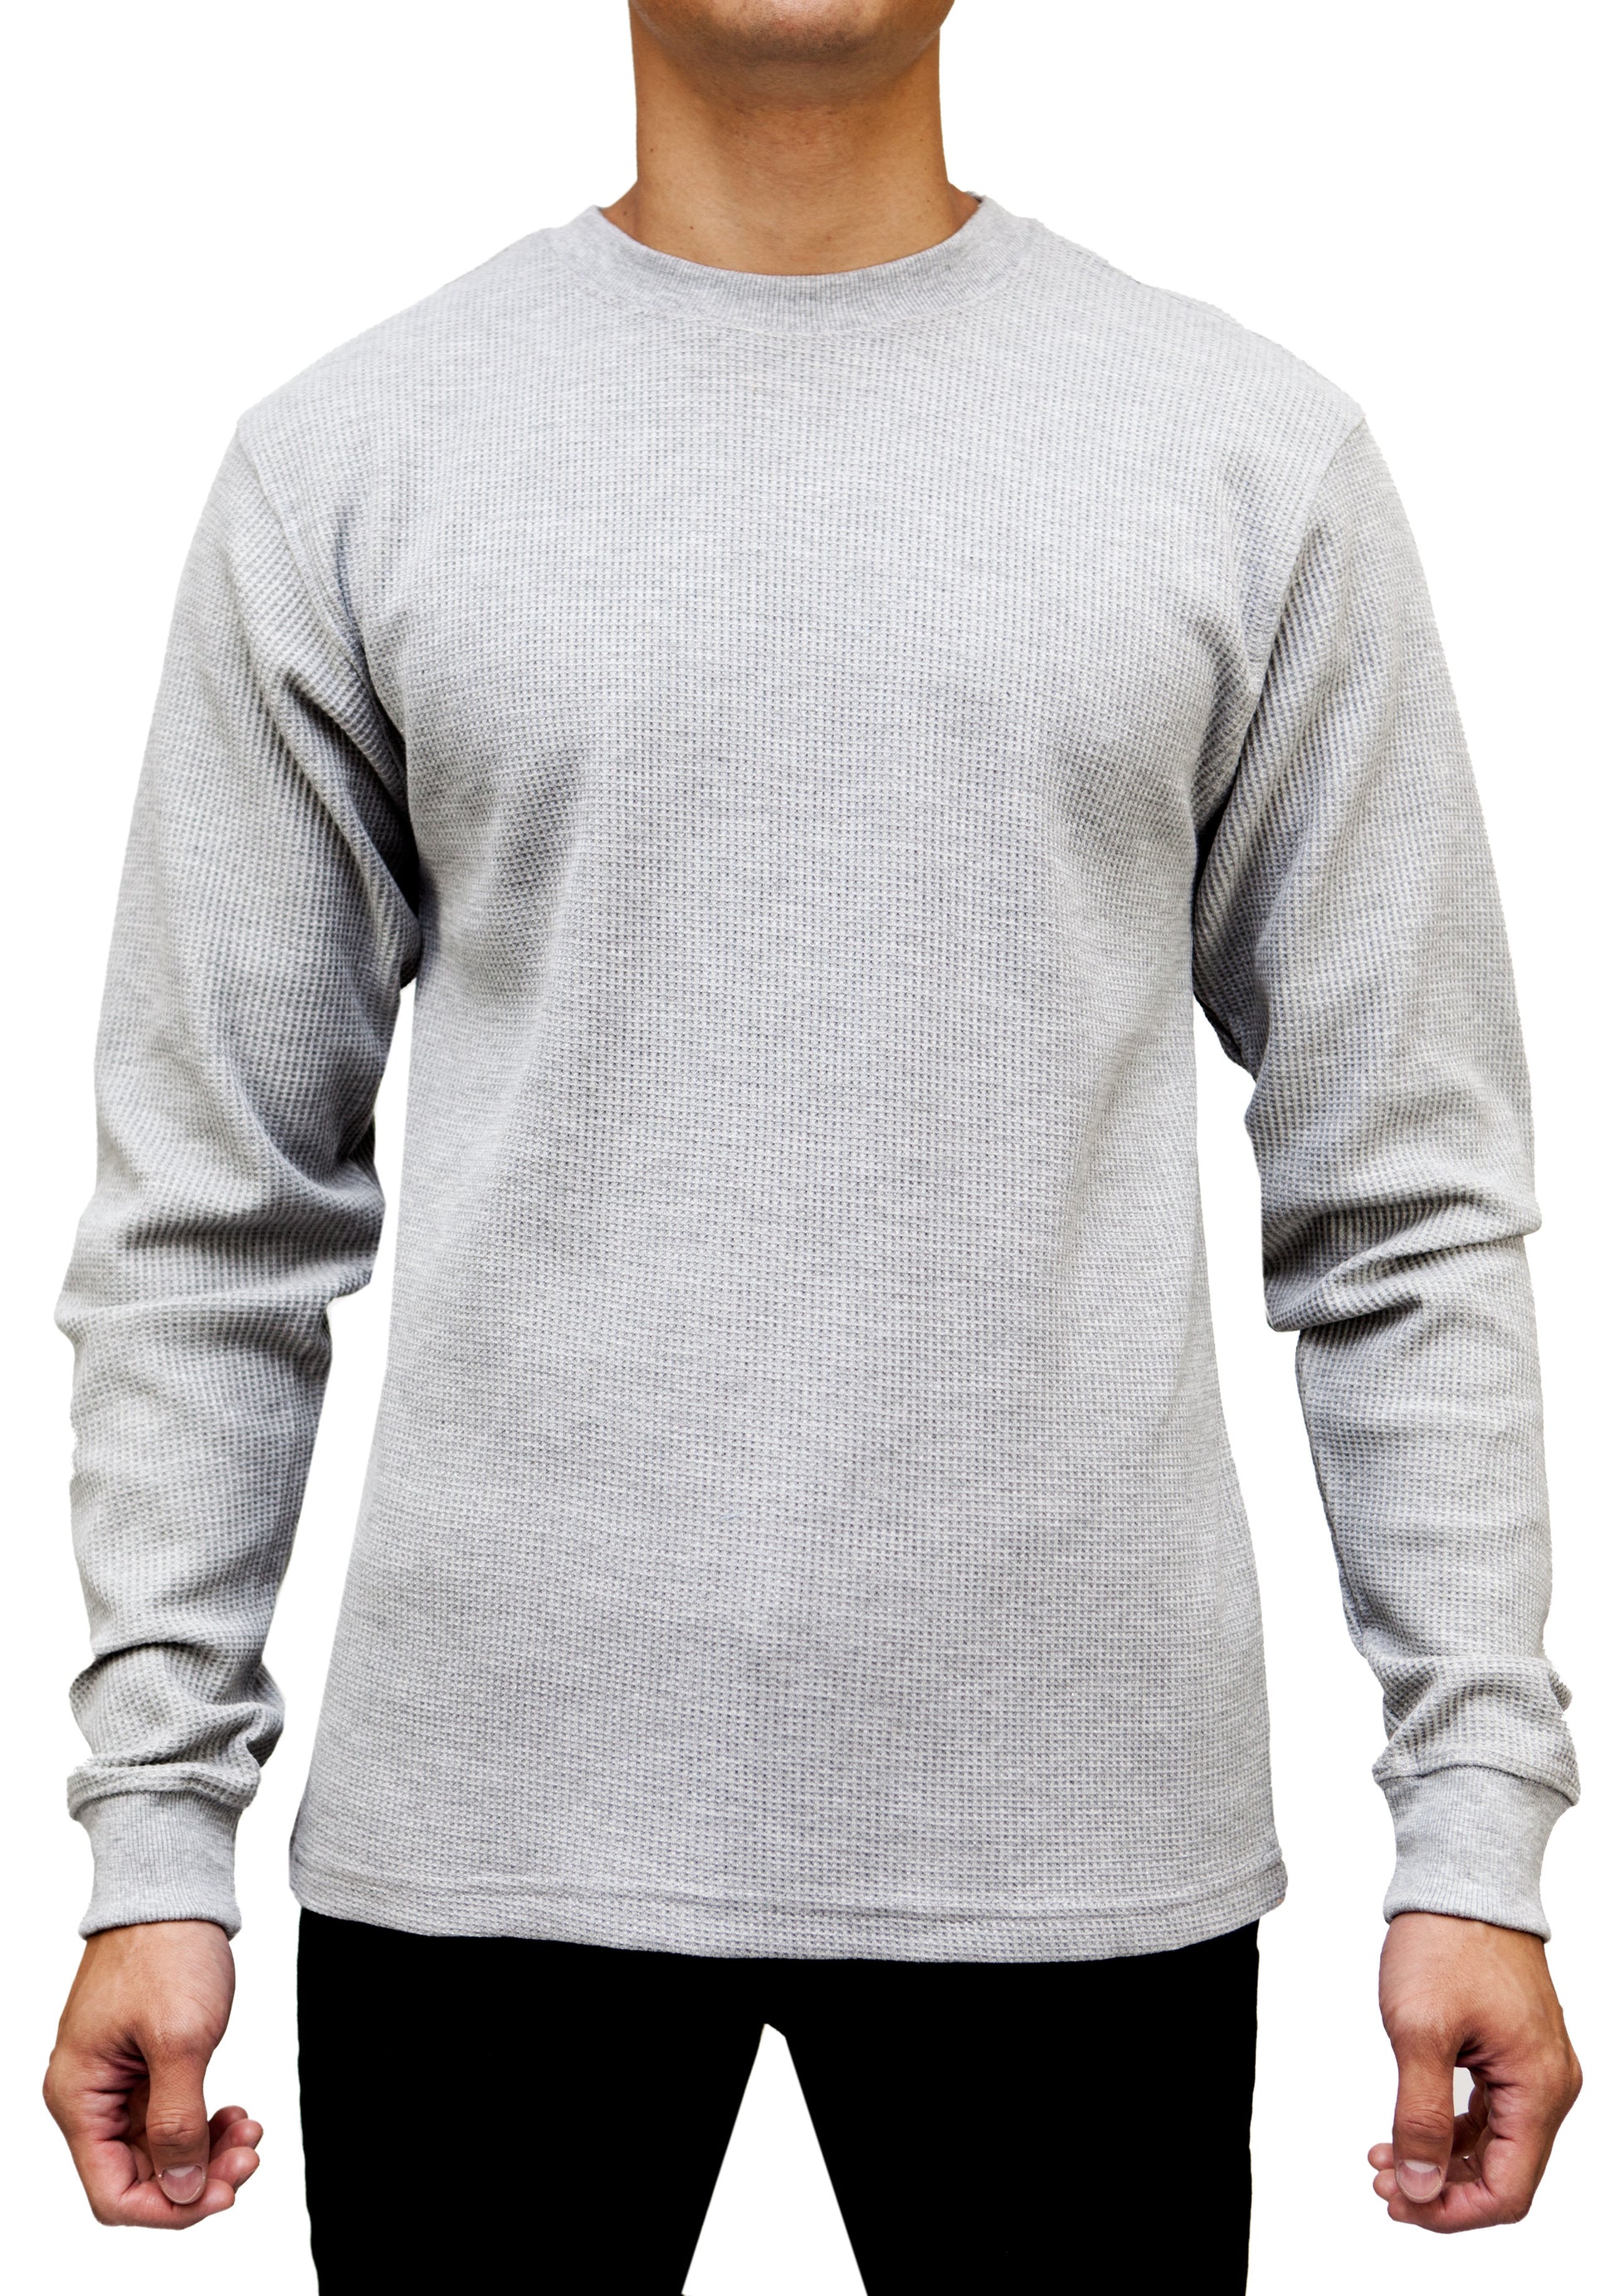 AT11-Access Men's Heavyweight Long Sleeve Thermal Crew Neck Top